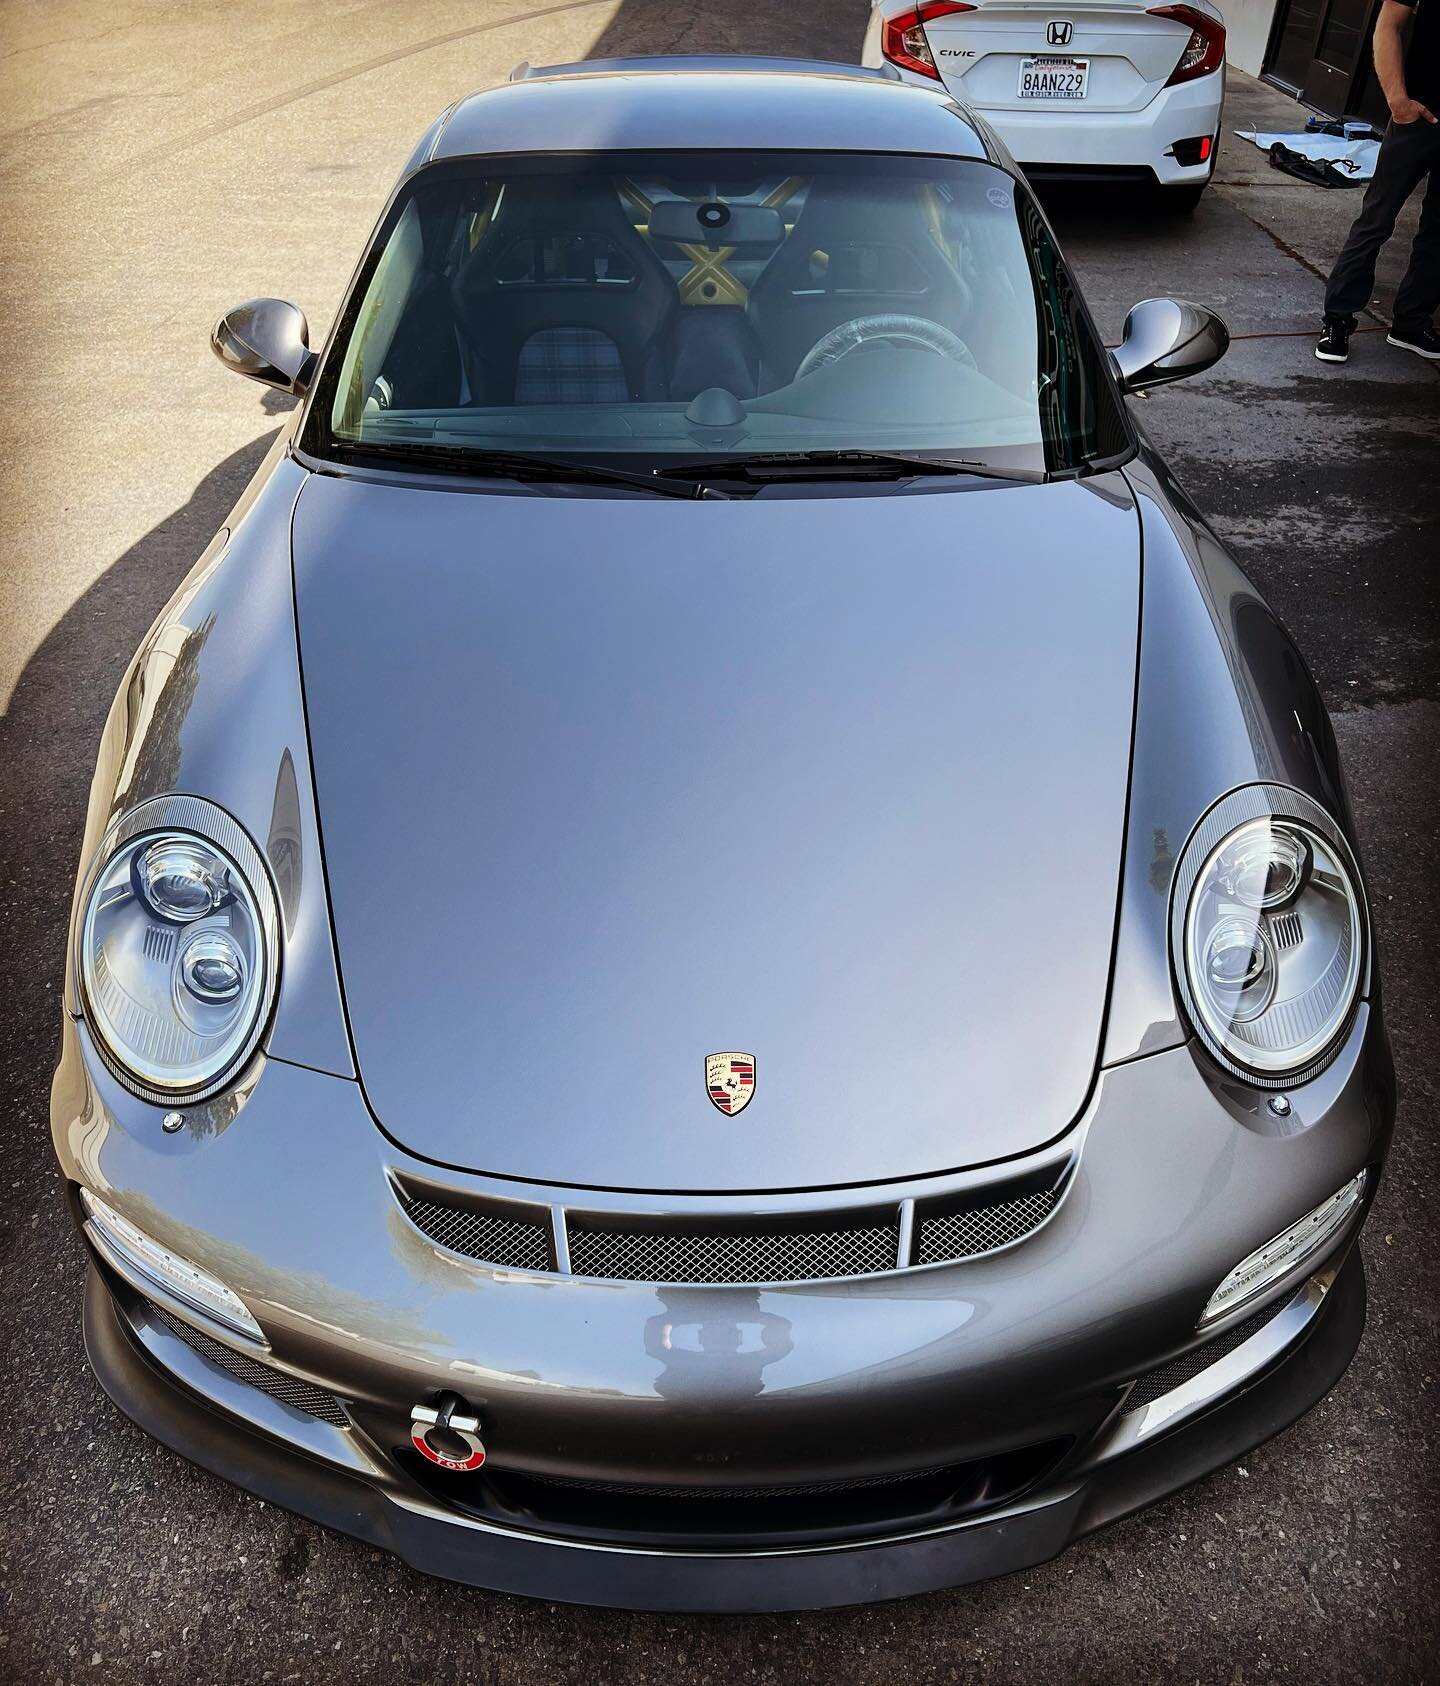 We&rsquo;re looking to add another painter to our team. Tag someone you know who might be interested!!

#porsche

#gt3

#automotiverepair 

#carrepair 

#devilbiss 

#refinishing 

#paintjob 

#refinishkulture 

#refinish 

#motivatedpainters 

#cars